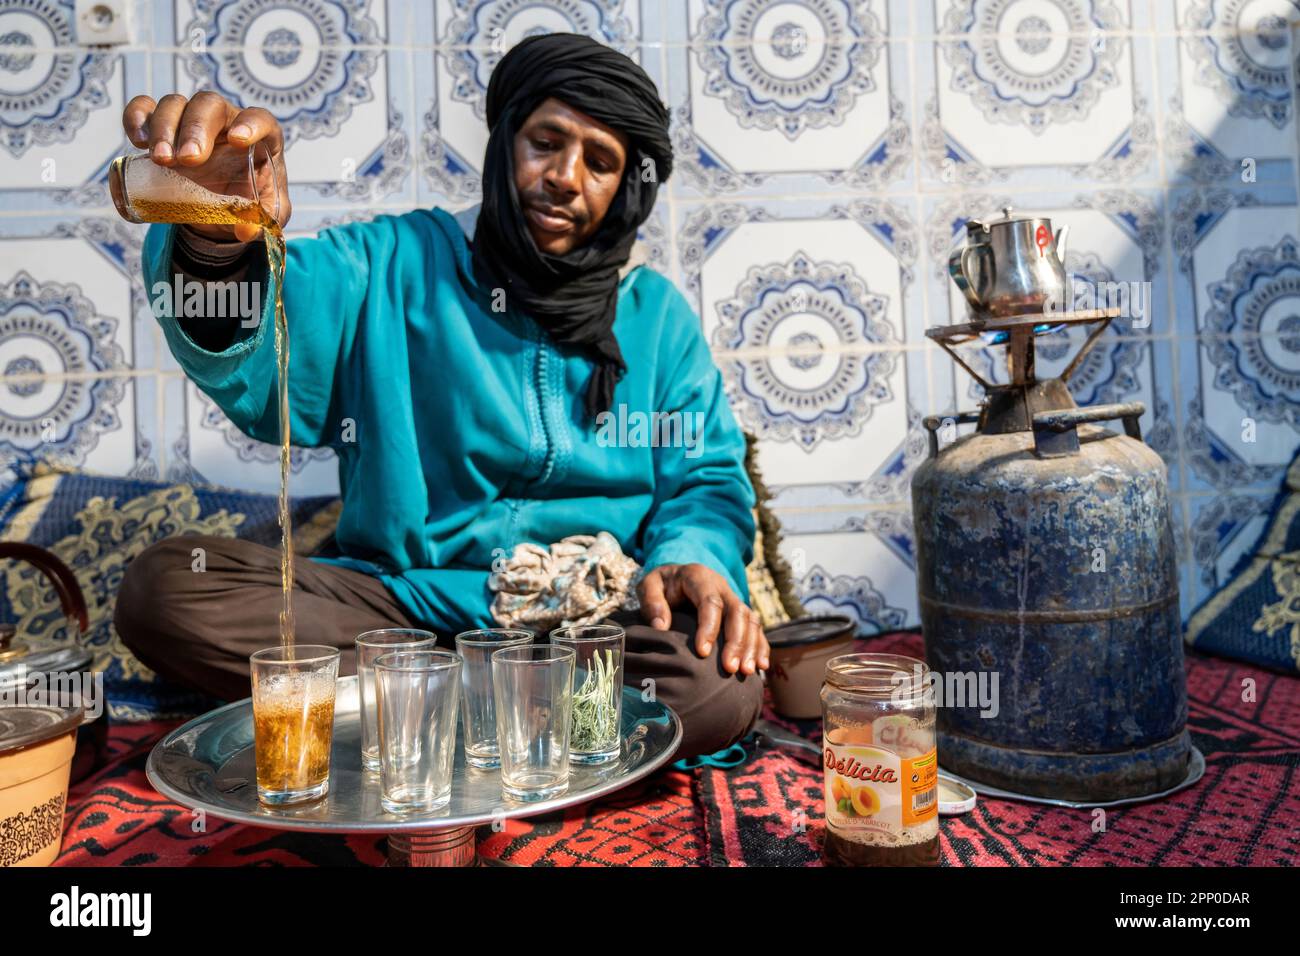 Berber man dressed in djellaba and black turban serving tea in the traditional way. Stock Photo